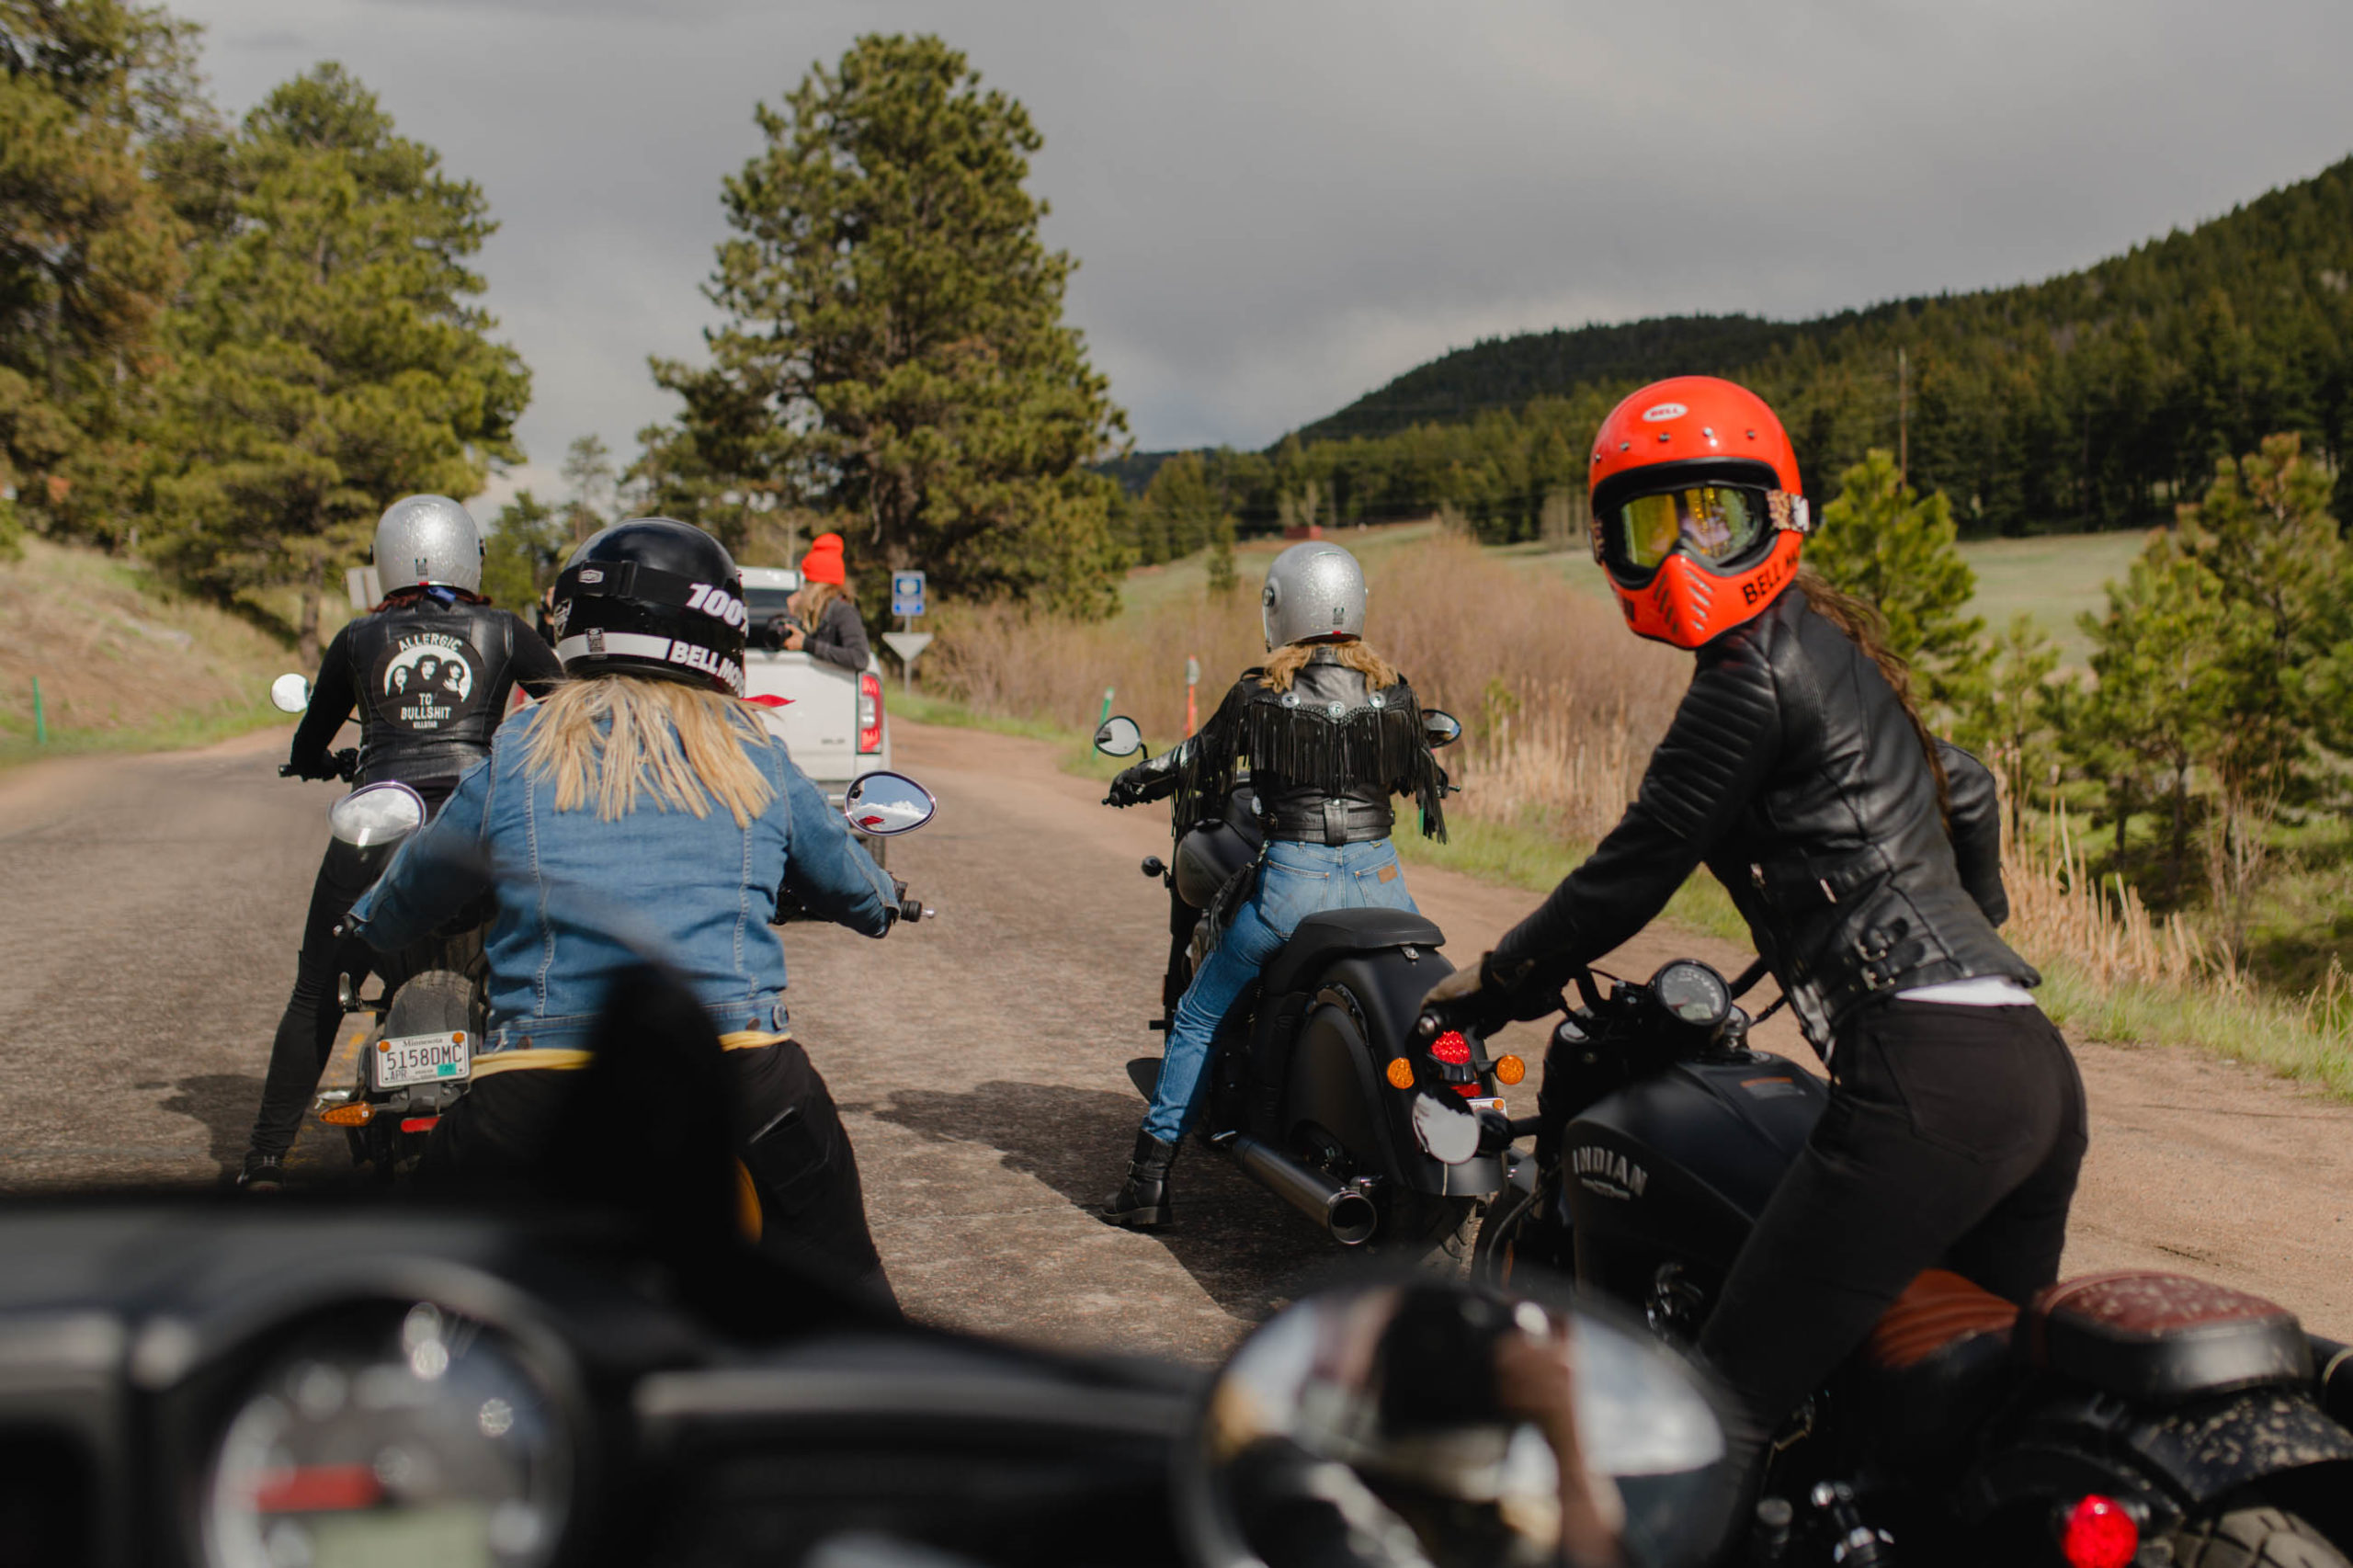 A view of female motorcyclists on the Wild Gypsy Tour, enjoying a ride together